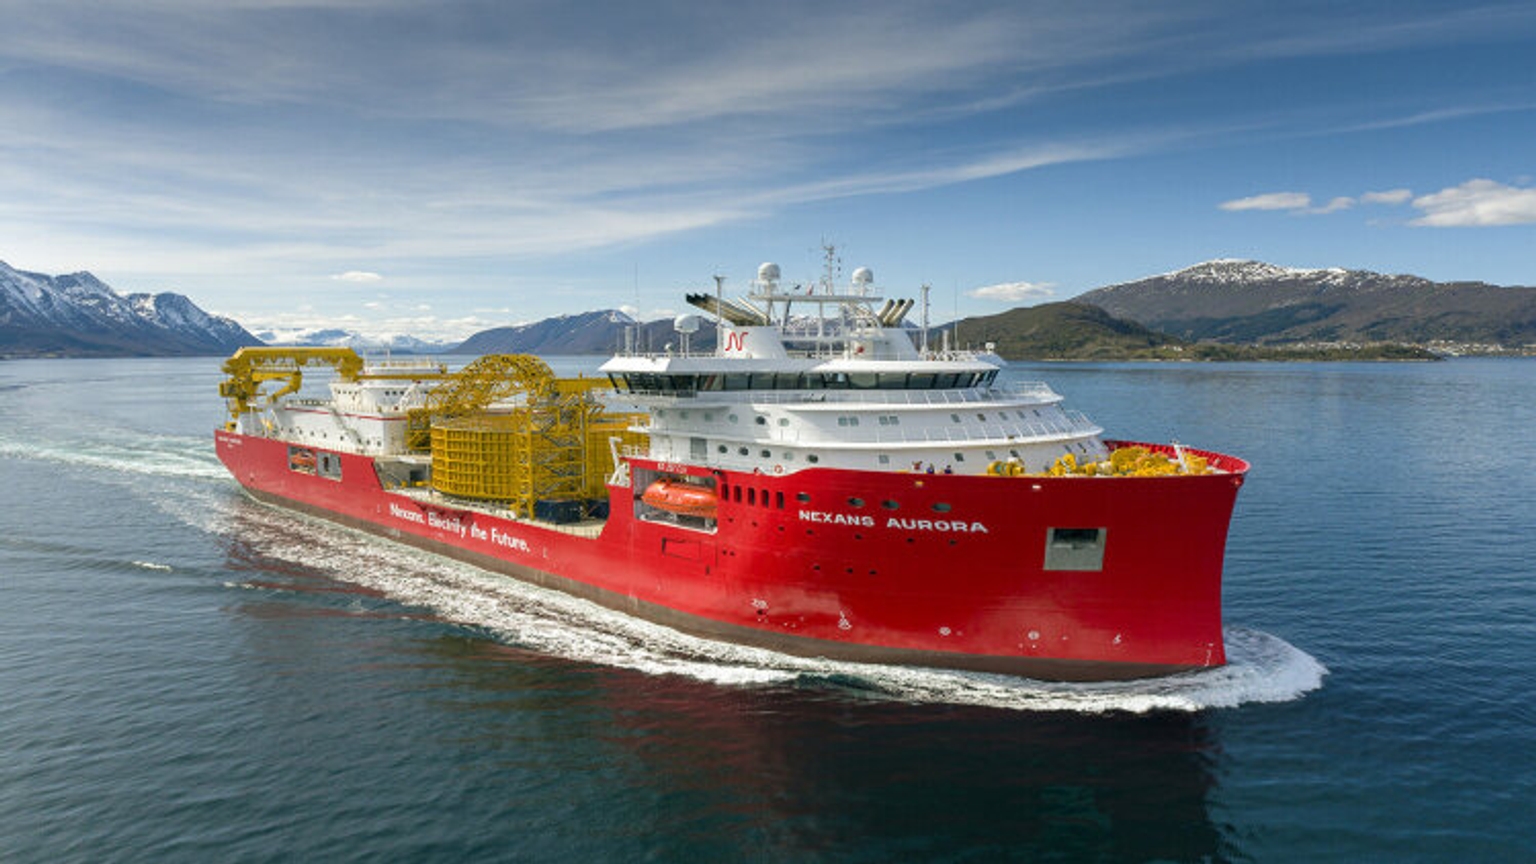 The CLV Nexans Aurora is 149.9 metres long, 31 metres wide and can install cables down to a depth of 3 000 metres.